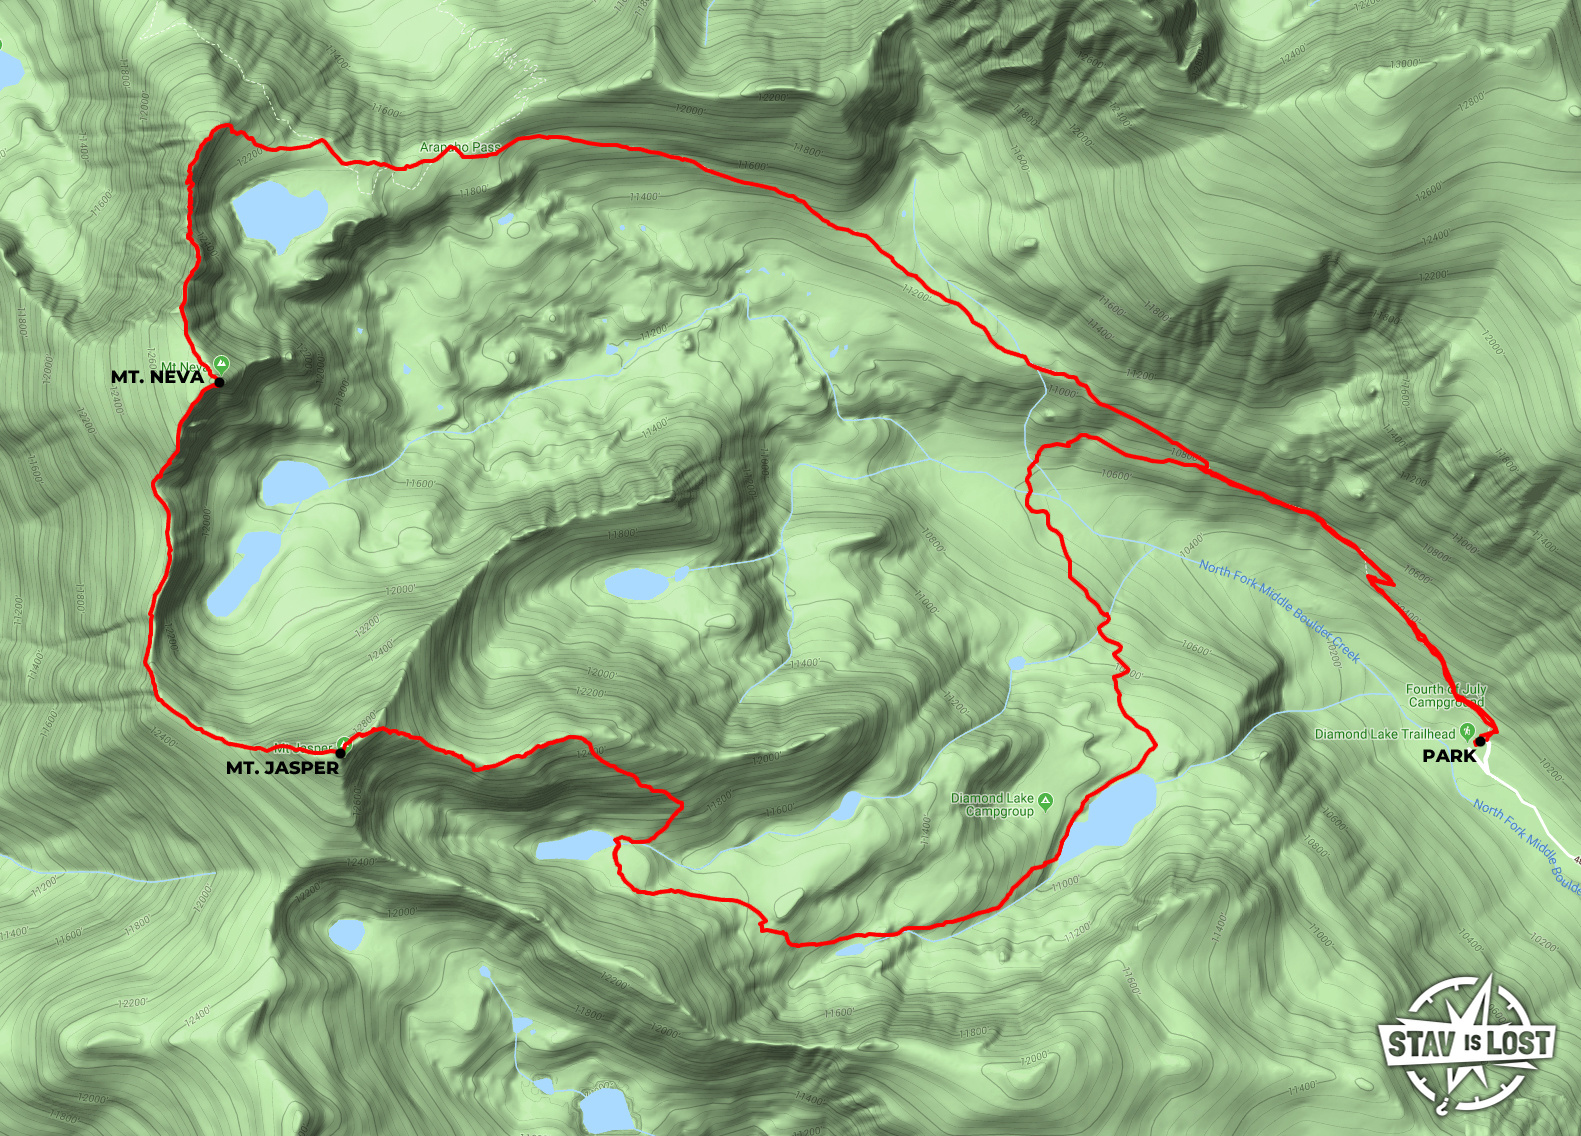 map for Mount Neva and Mount Jasper via Arapaho Pass and Diamond Lake Loop by stav is lost